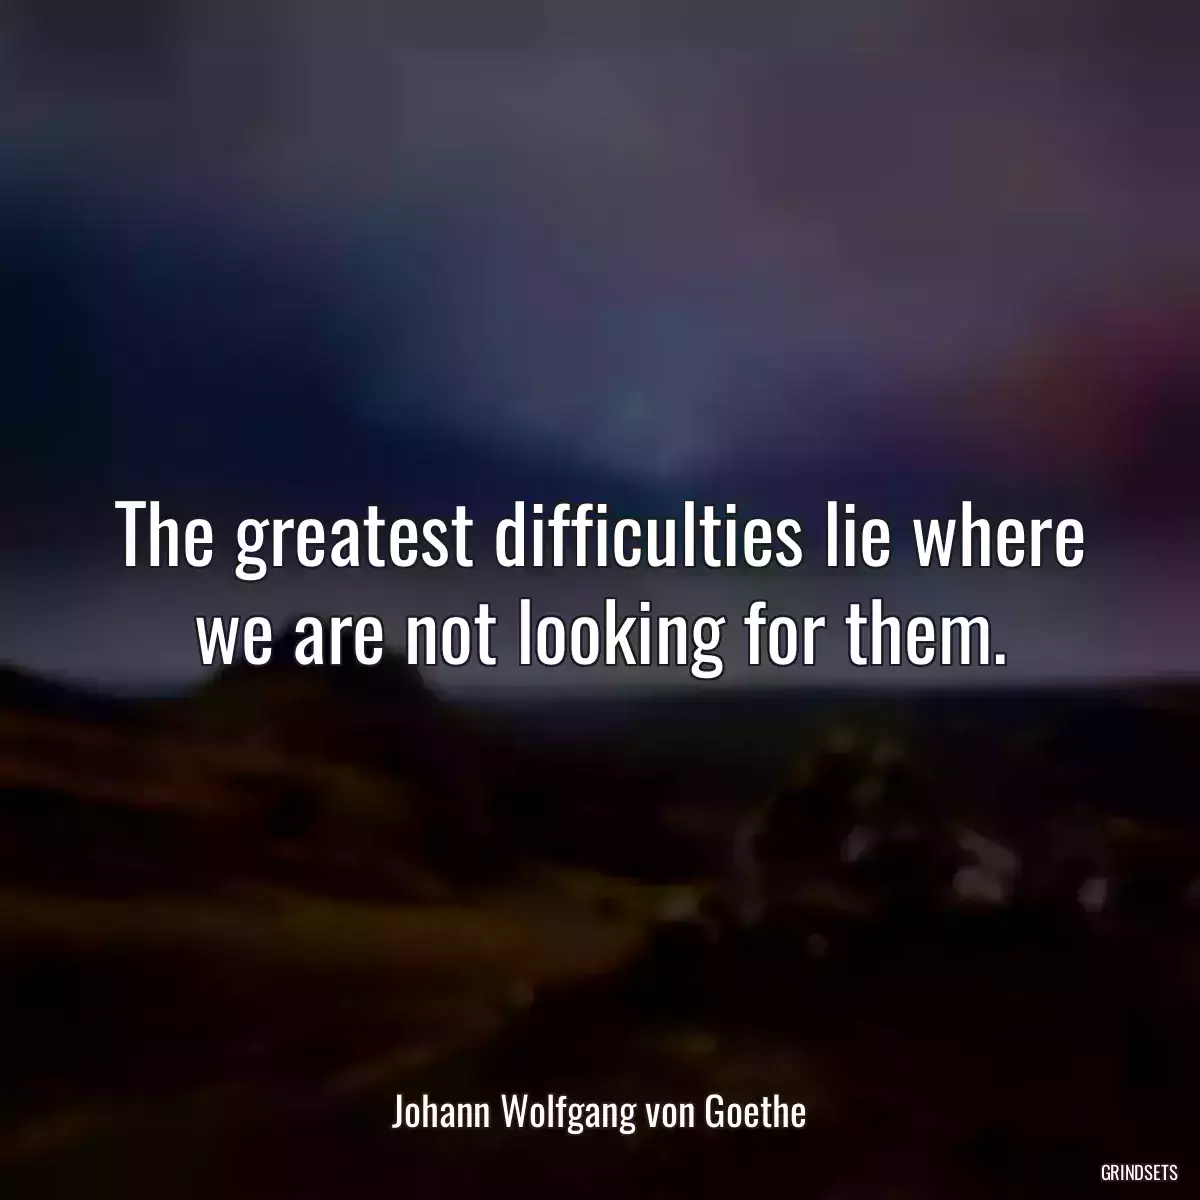 The greatest difficulties lie where we are not looking for them.